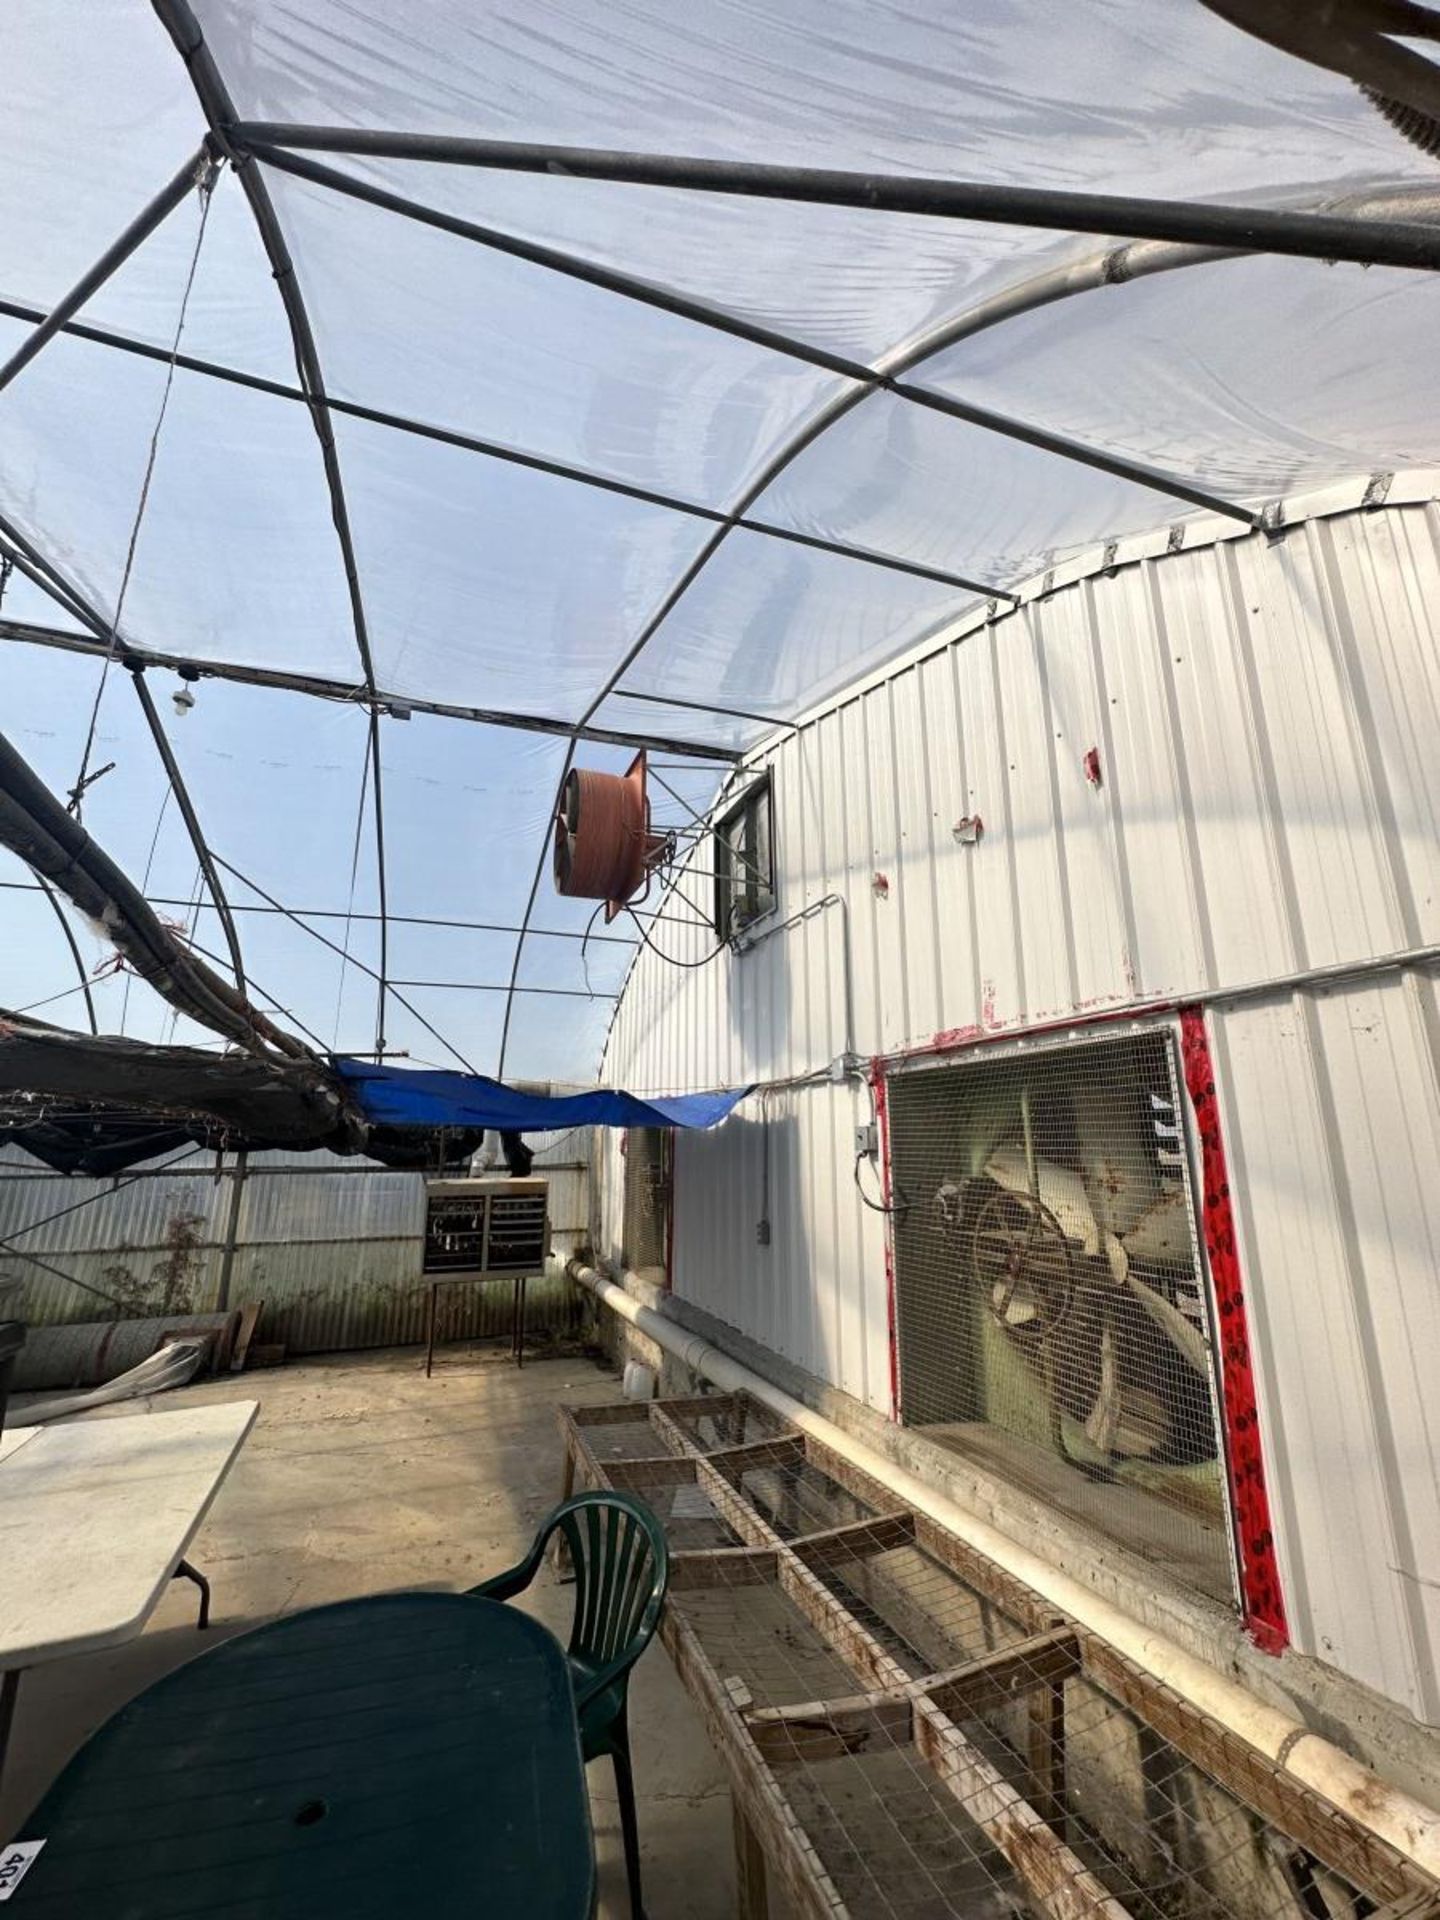 WESTBROOK GUTTER CONNECT 2-BAY GREENHOUSE 60FT X 144FT X 96” H & 2-BAY 60FT X 72 FT X 96”, INCLUDING - Image 38 of 95